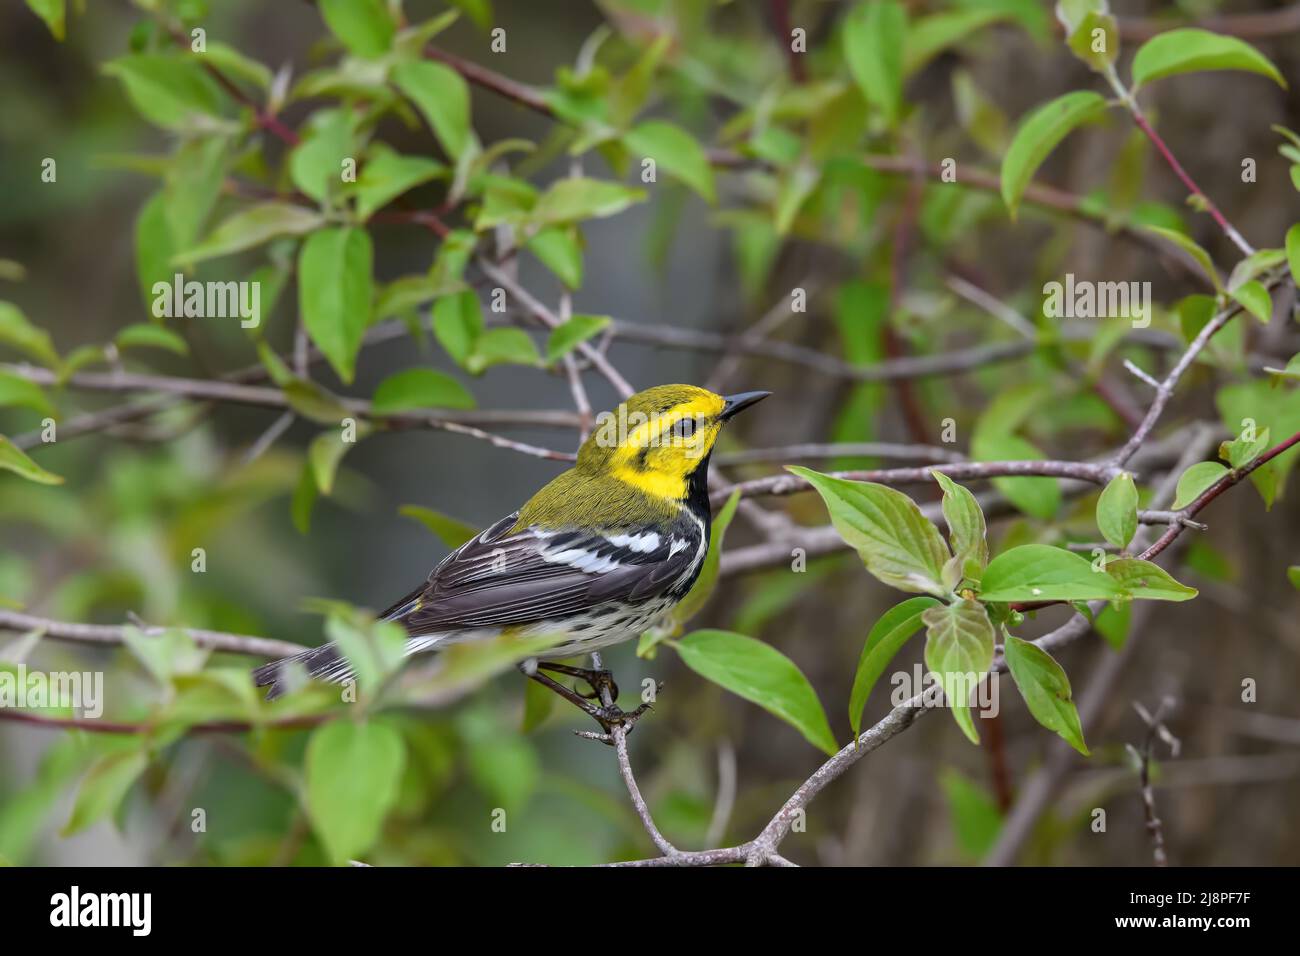 Black-throated Green Warbler or Setophaga virens in woods on a cloudy spring day during migration. Stock Photo